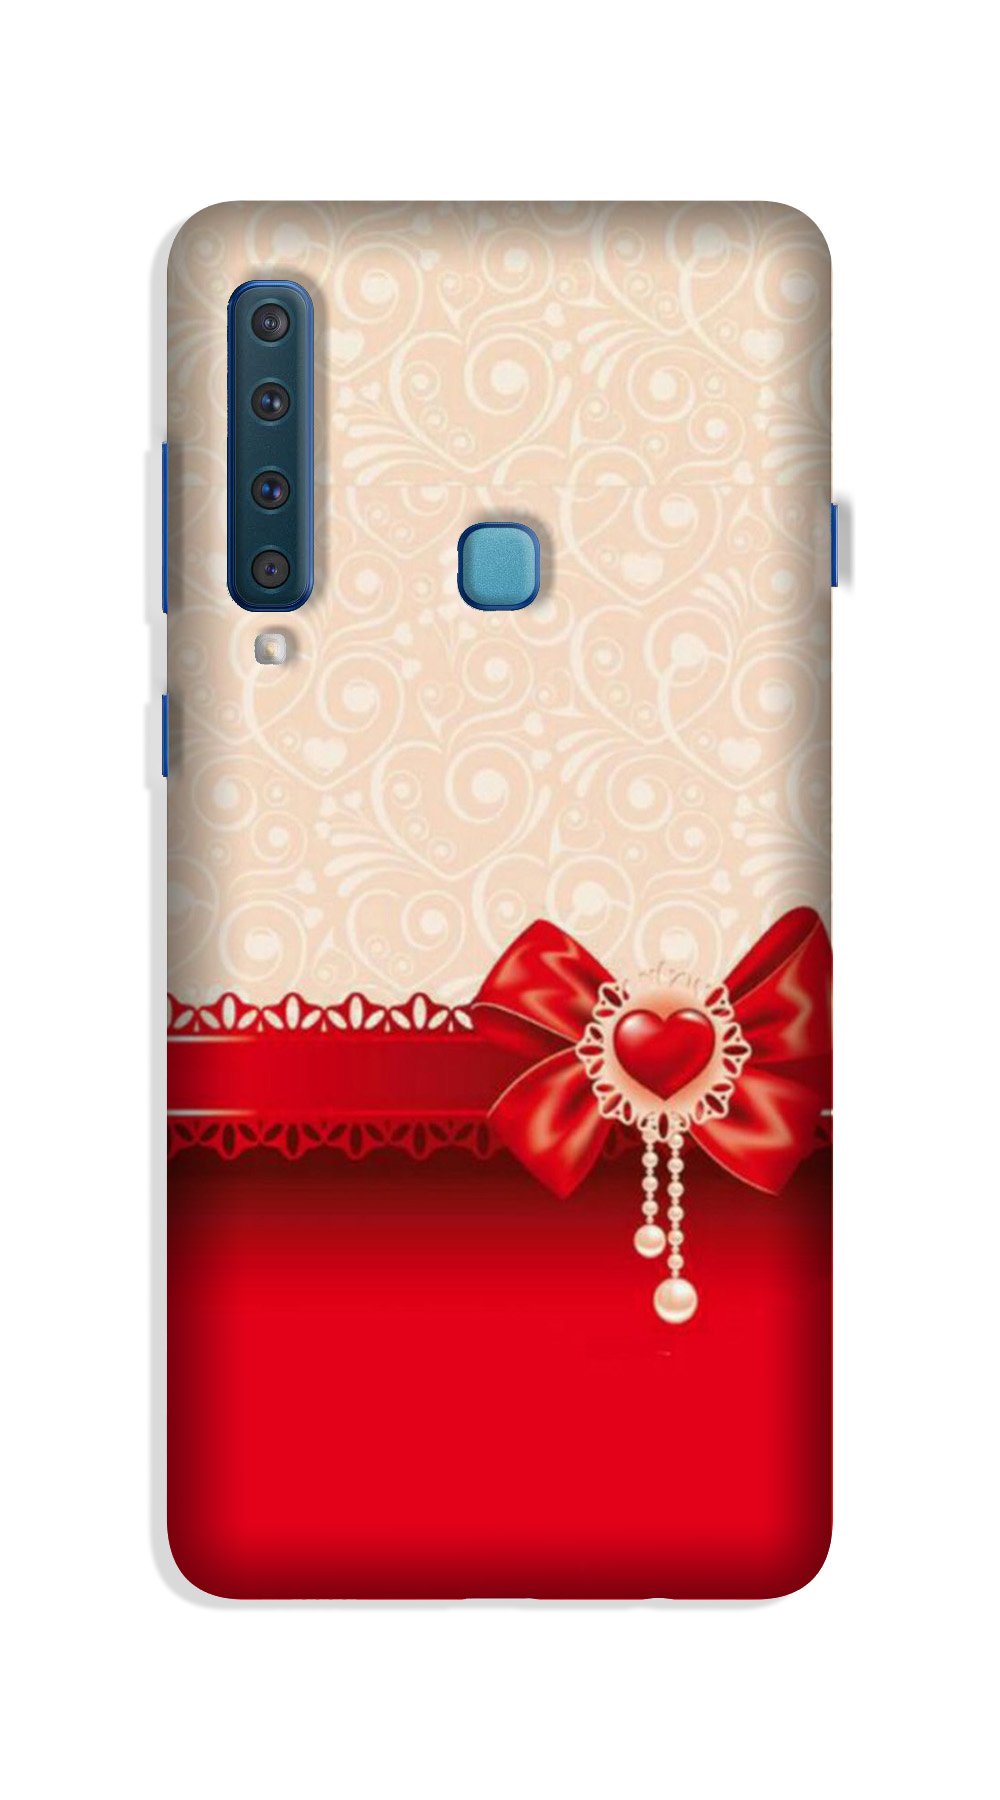 Gift Wrap3 Case for Galaxy A9 (2018)